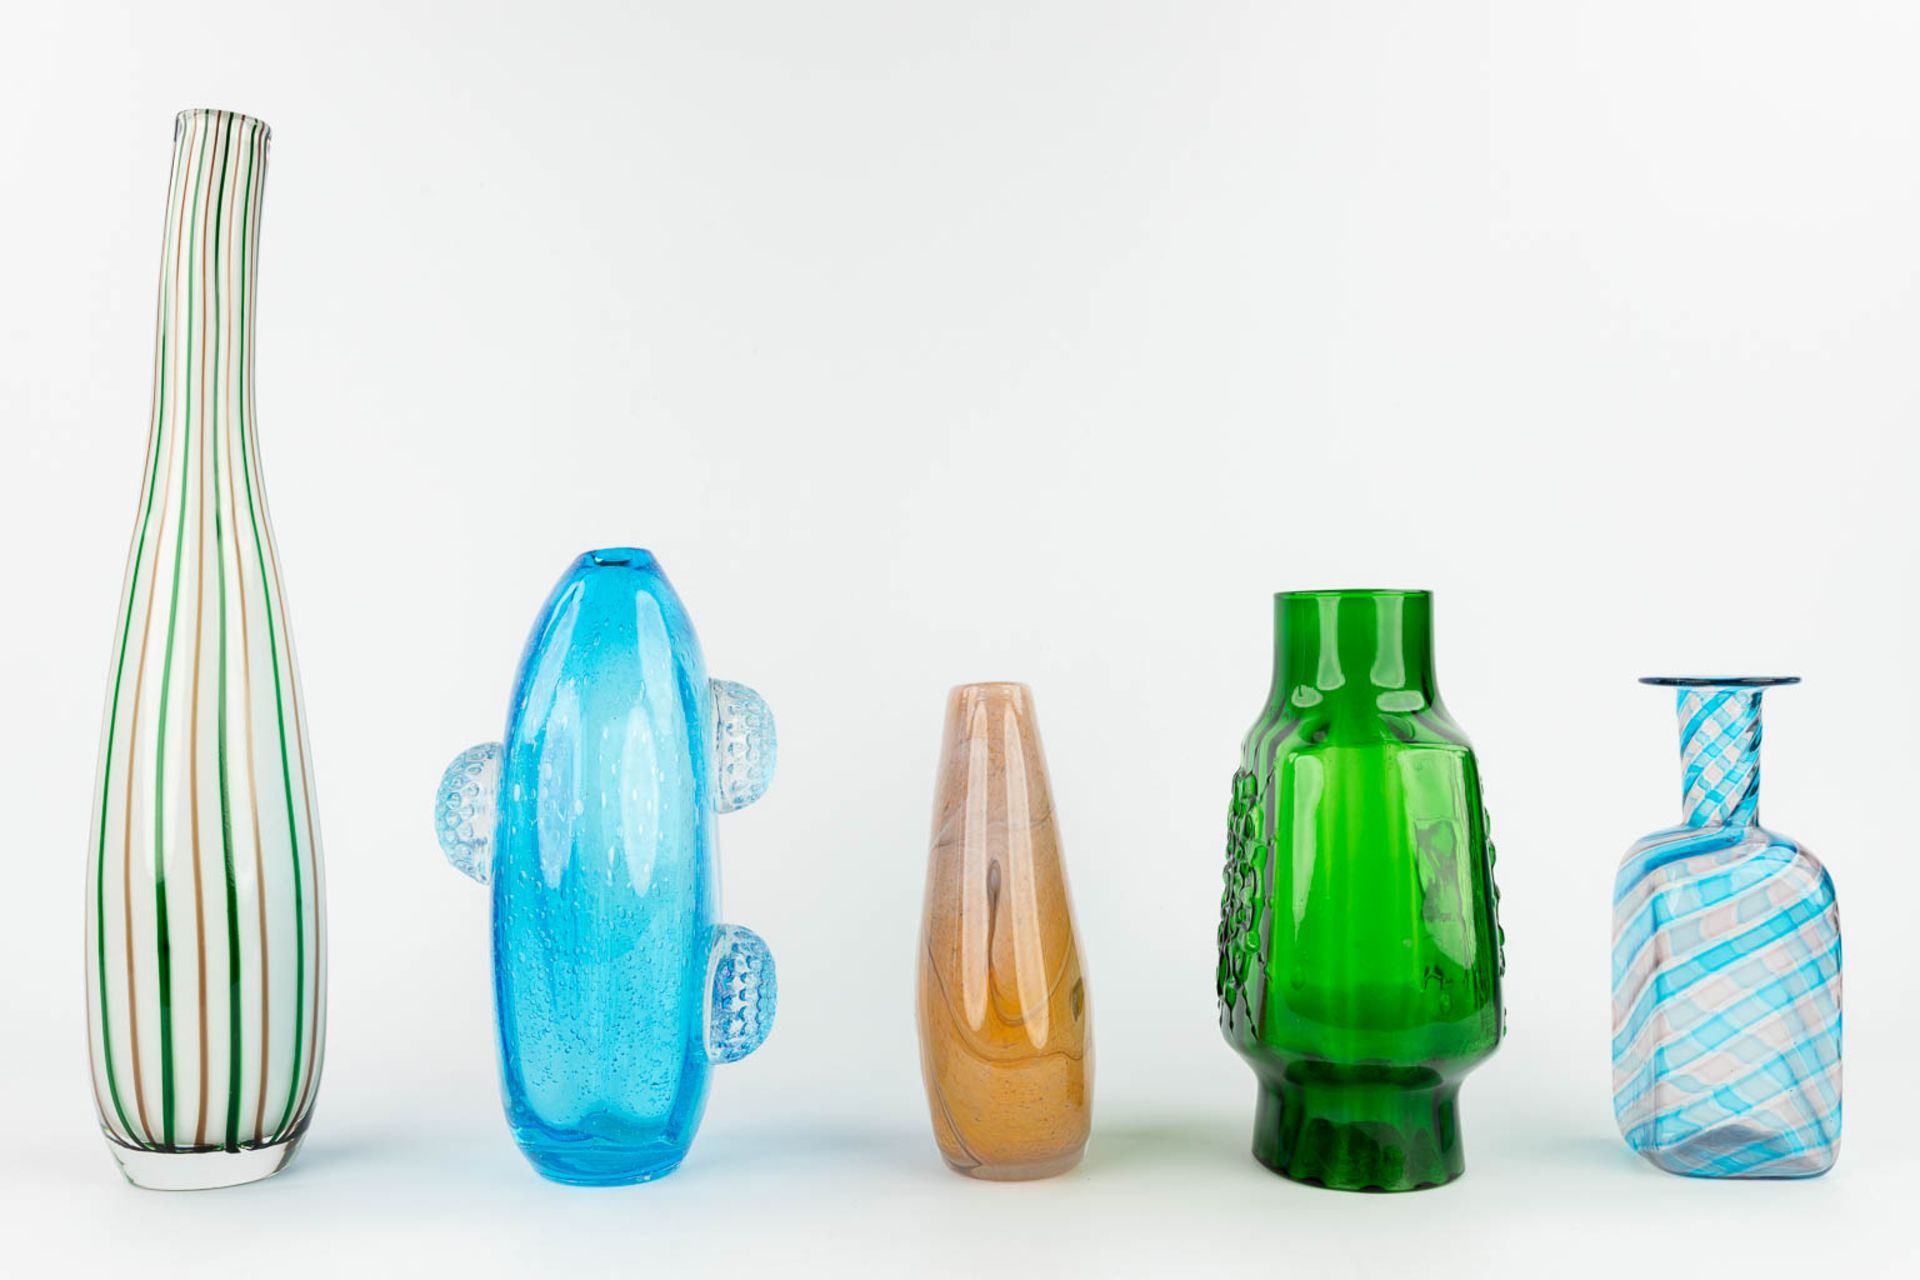 A collection of 5 glass vases, made in Murano, Italy and Scandinavia. (H: 45 x D: 10 cm) - Image 6 of 13